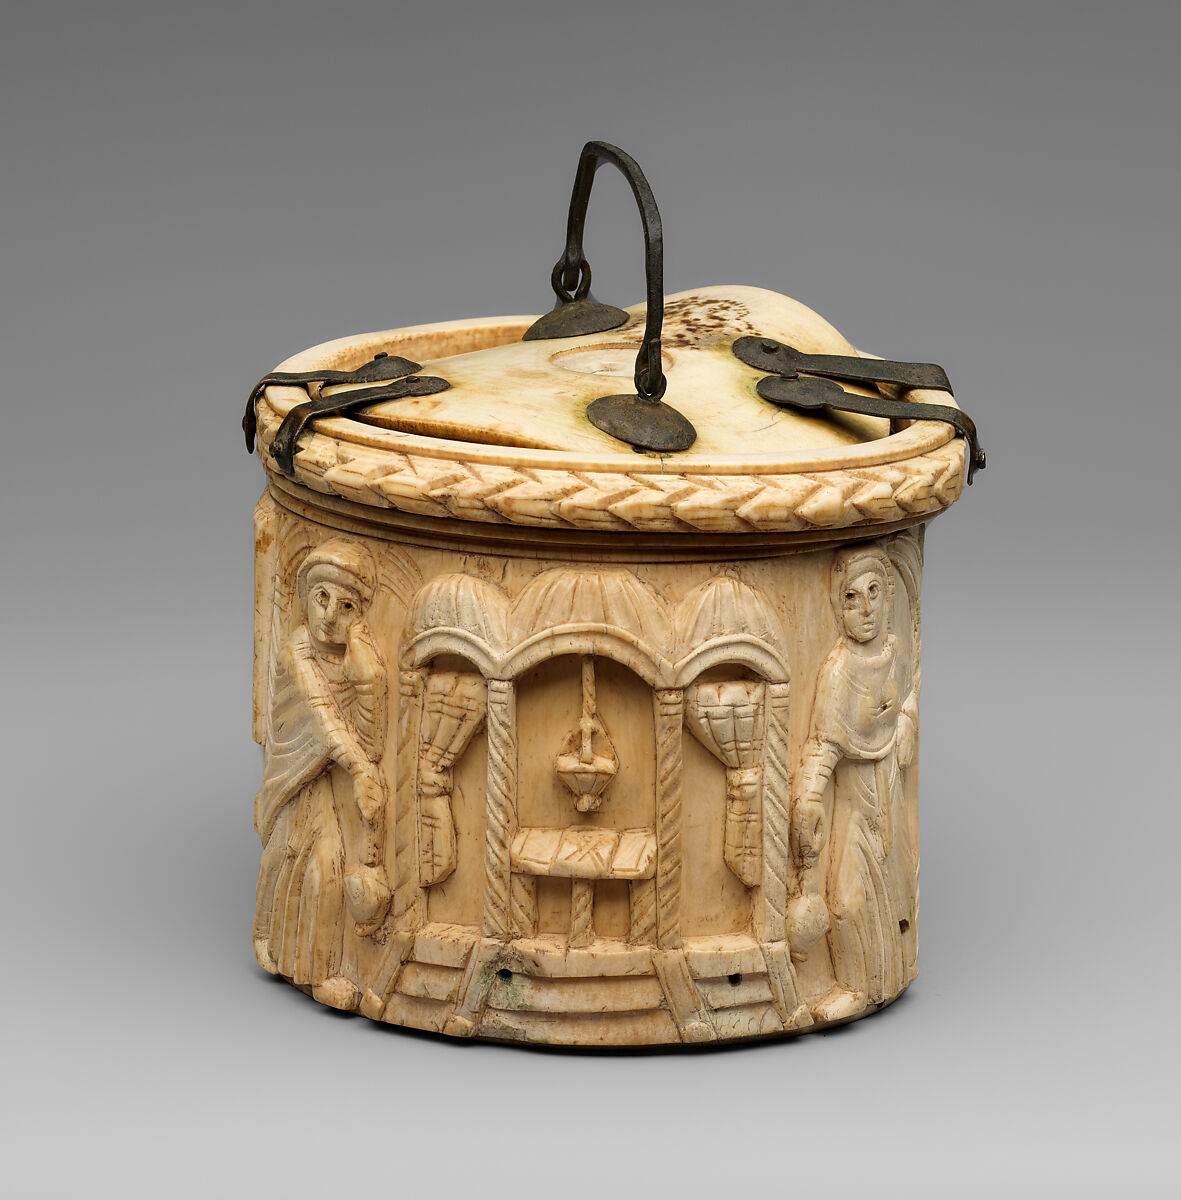 Circular Box (Pyxis) with the Women at Jesus' Tomb, Elephant ivory with metalwork and paint, Byzantine 